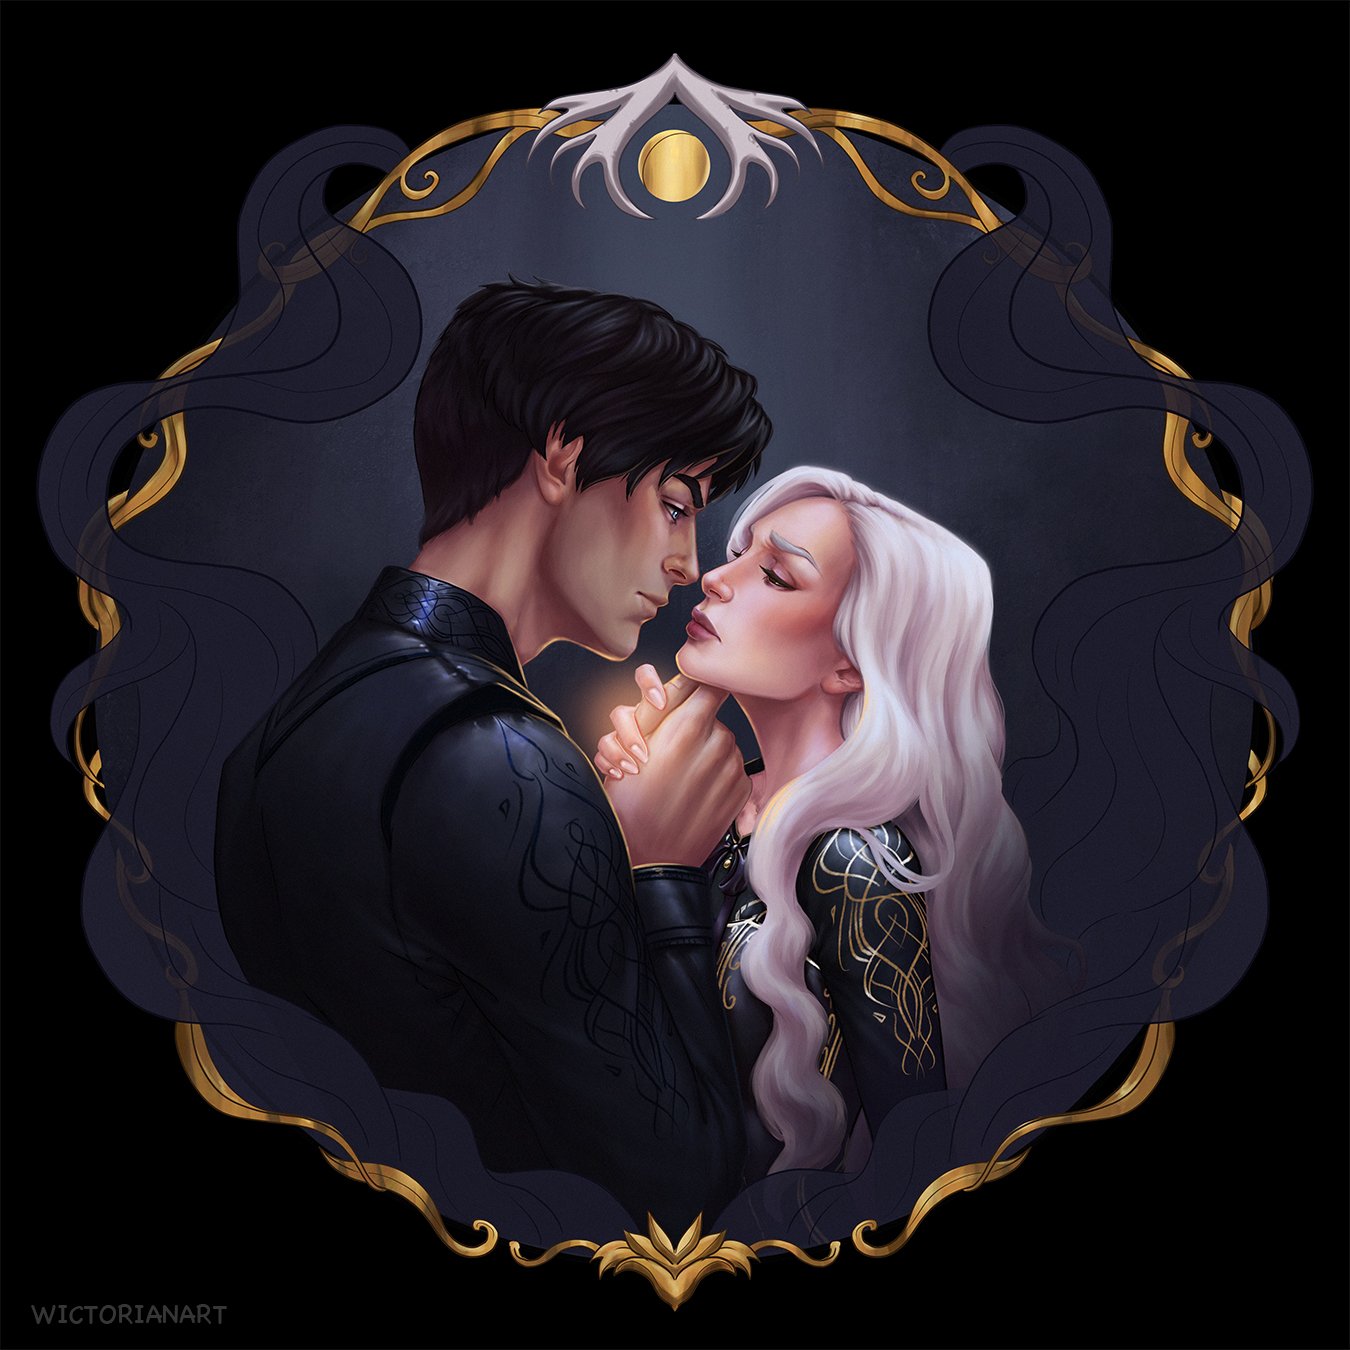 Wictorianart on Twitter: "Alina and the Darkling. I was a little sad Alina  didn't have white hair in the Netflix show, but oh well ☺️☺️ hope you like  it either way! #ShadowAndBone #